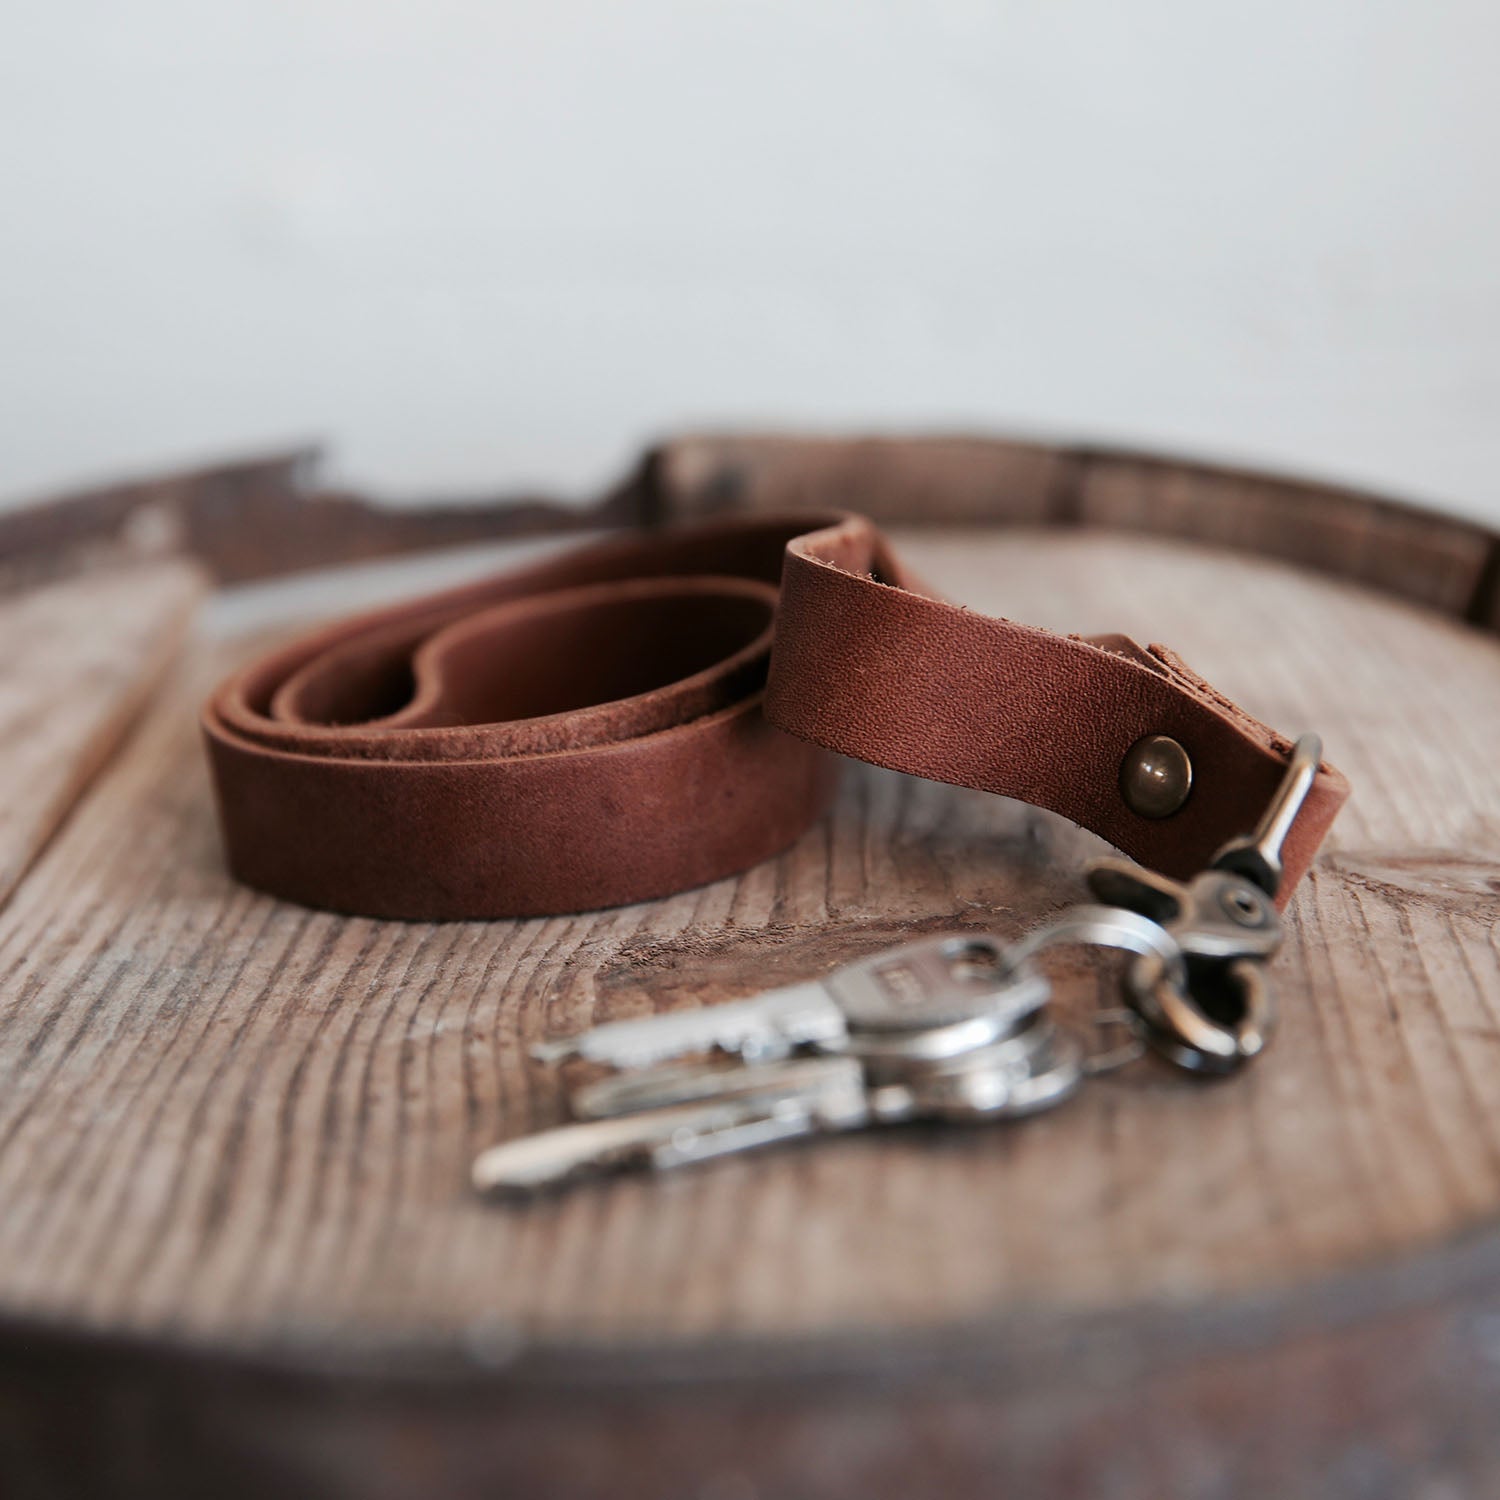 Personalized Leather Keychain Key Chain Ring - The Henry, Blackat Holtz Leather